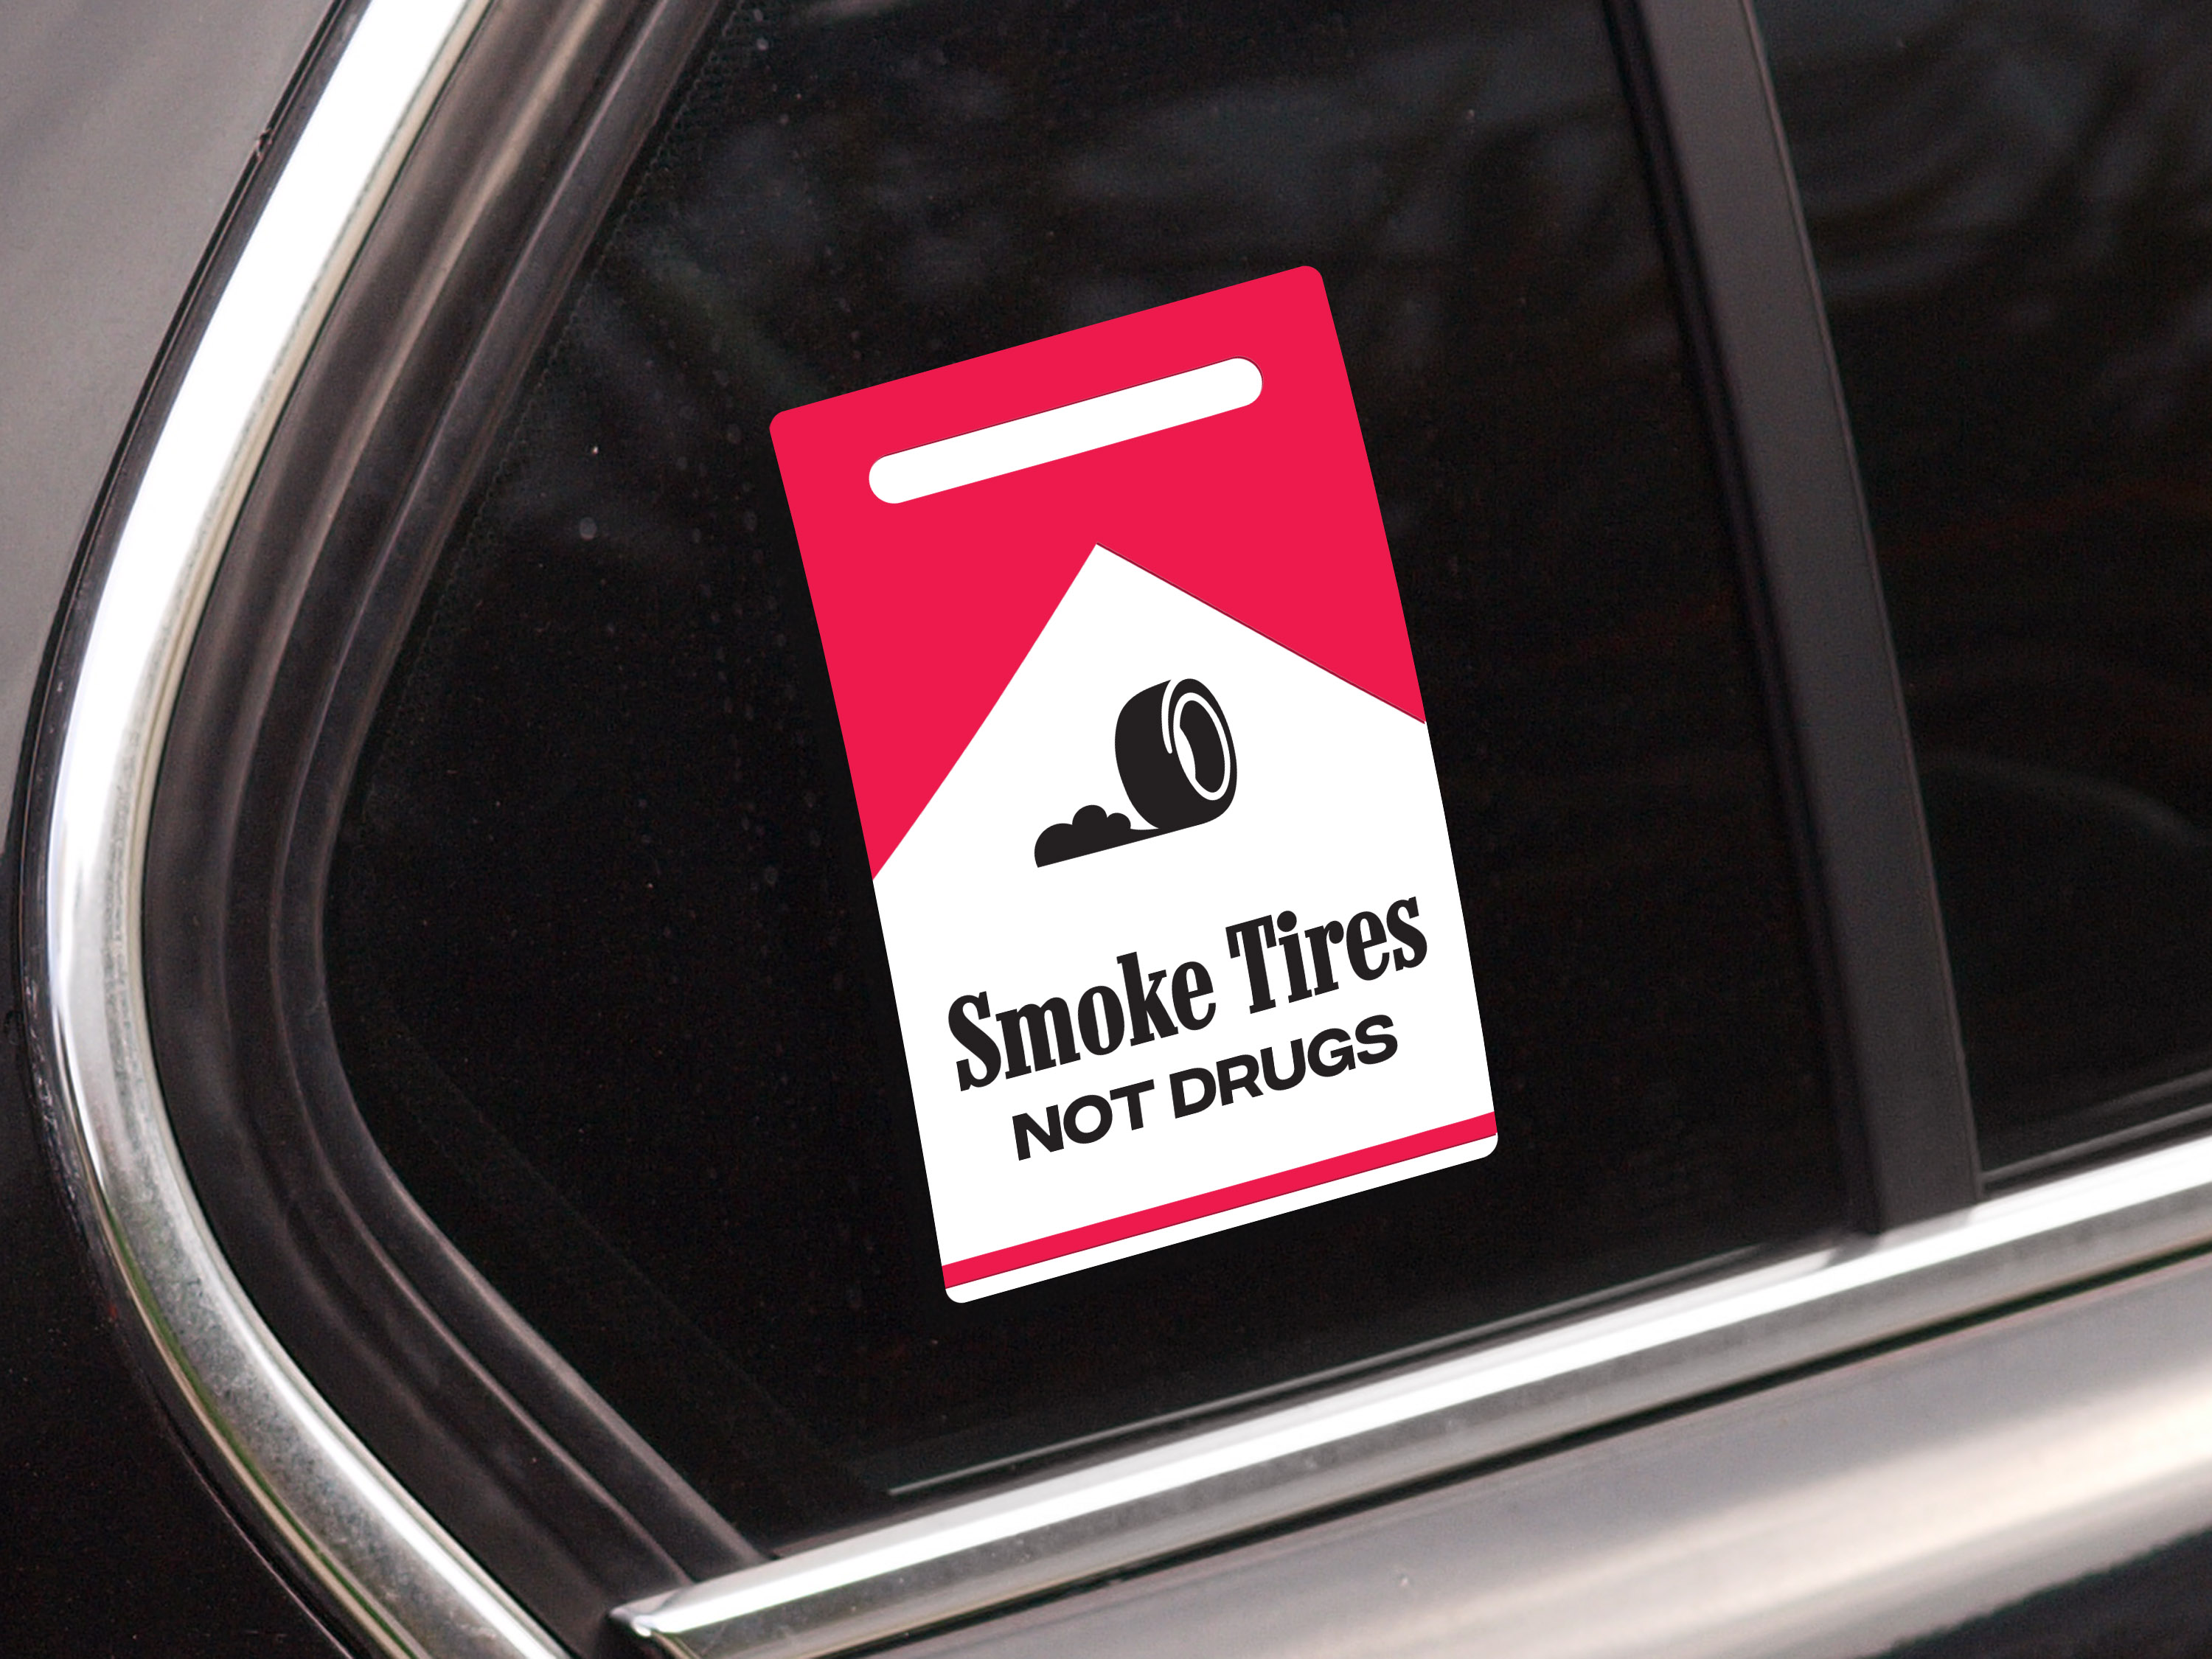 Contour cut vinyl sticker for drifters. Looks like a pack of Marlboro cigarettes.